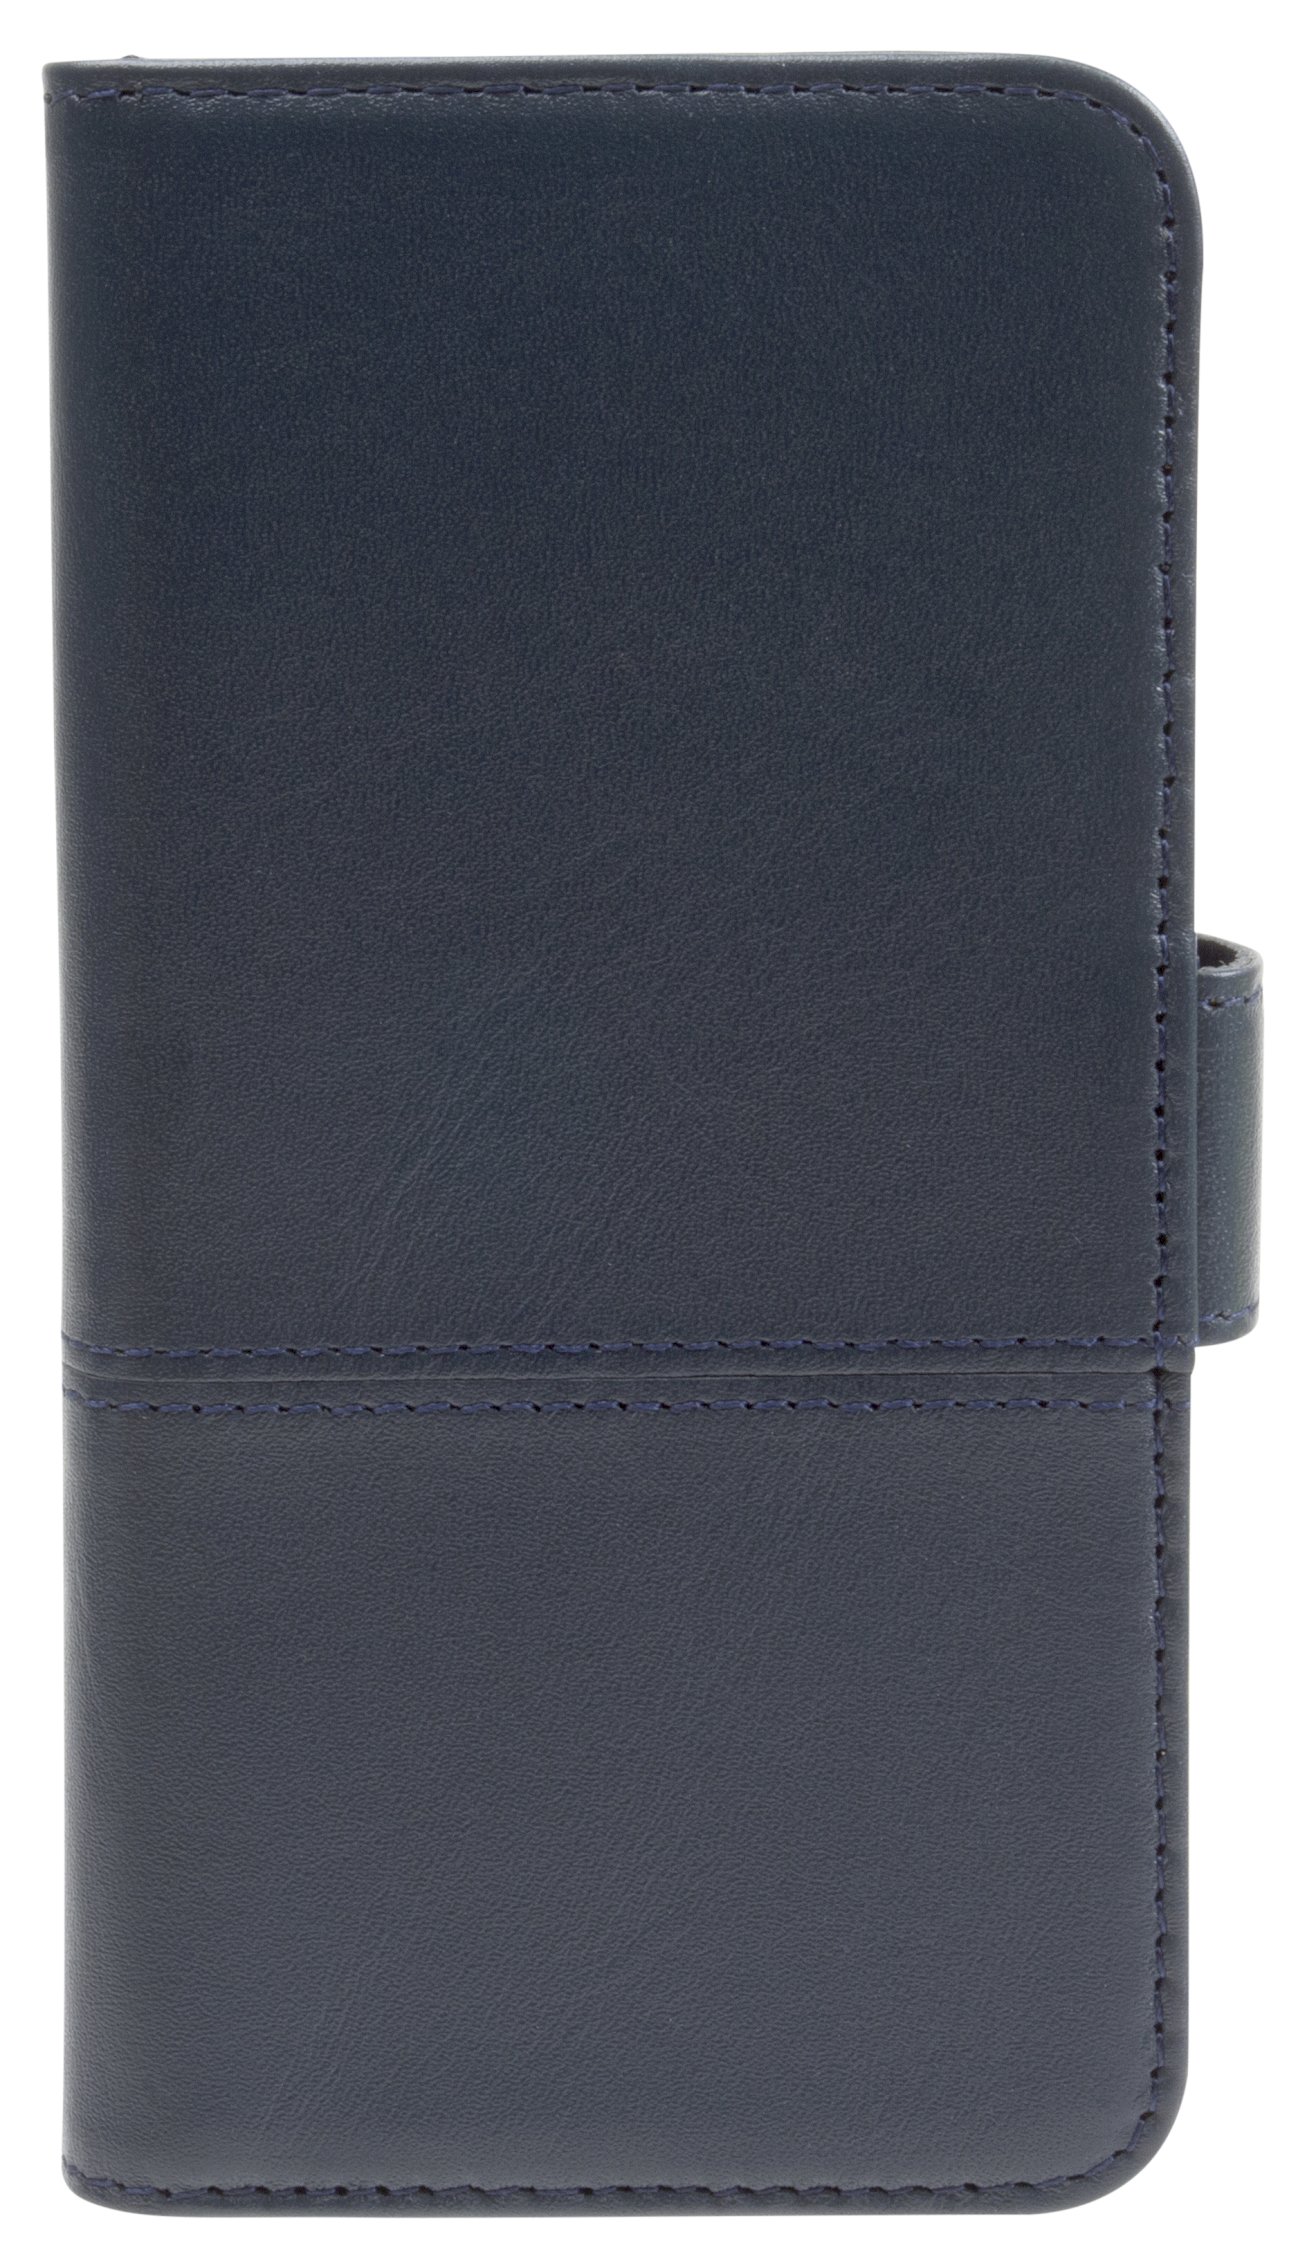 iPhone 6s/6, selected wallet leather, blue